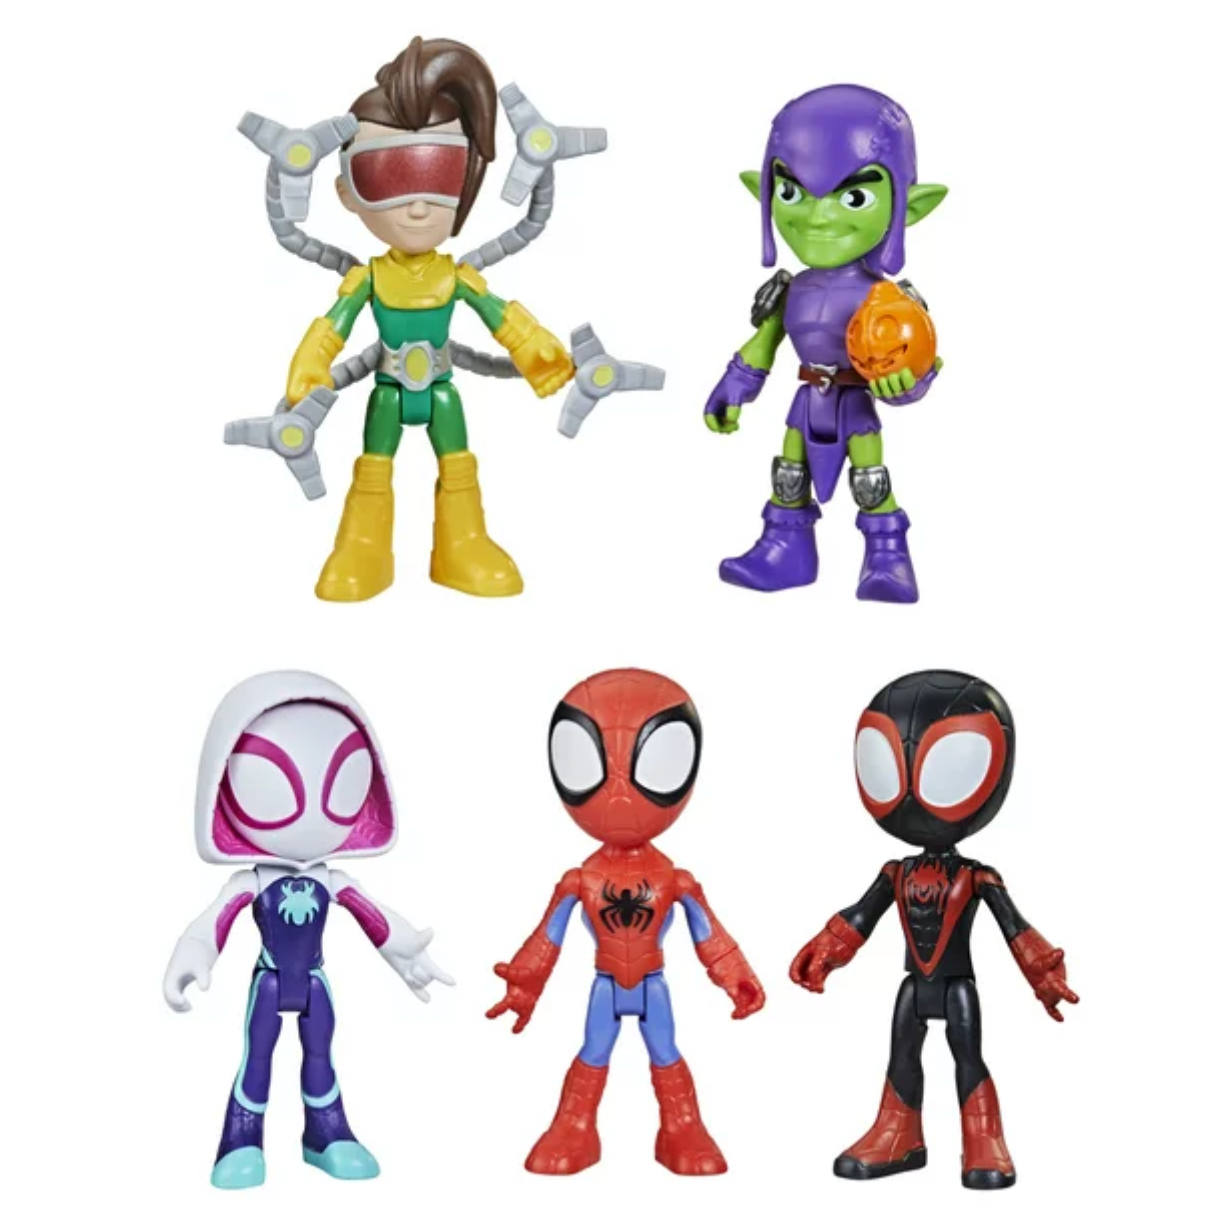 Marvel Spidey and his Amazing Friends Spidey Surprise - 10pk Toy New w Box